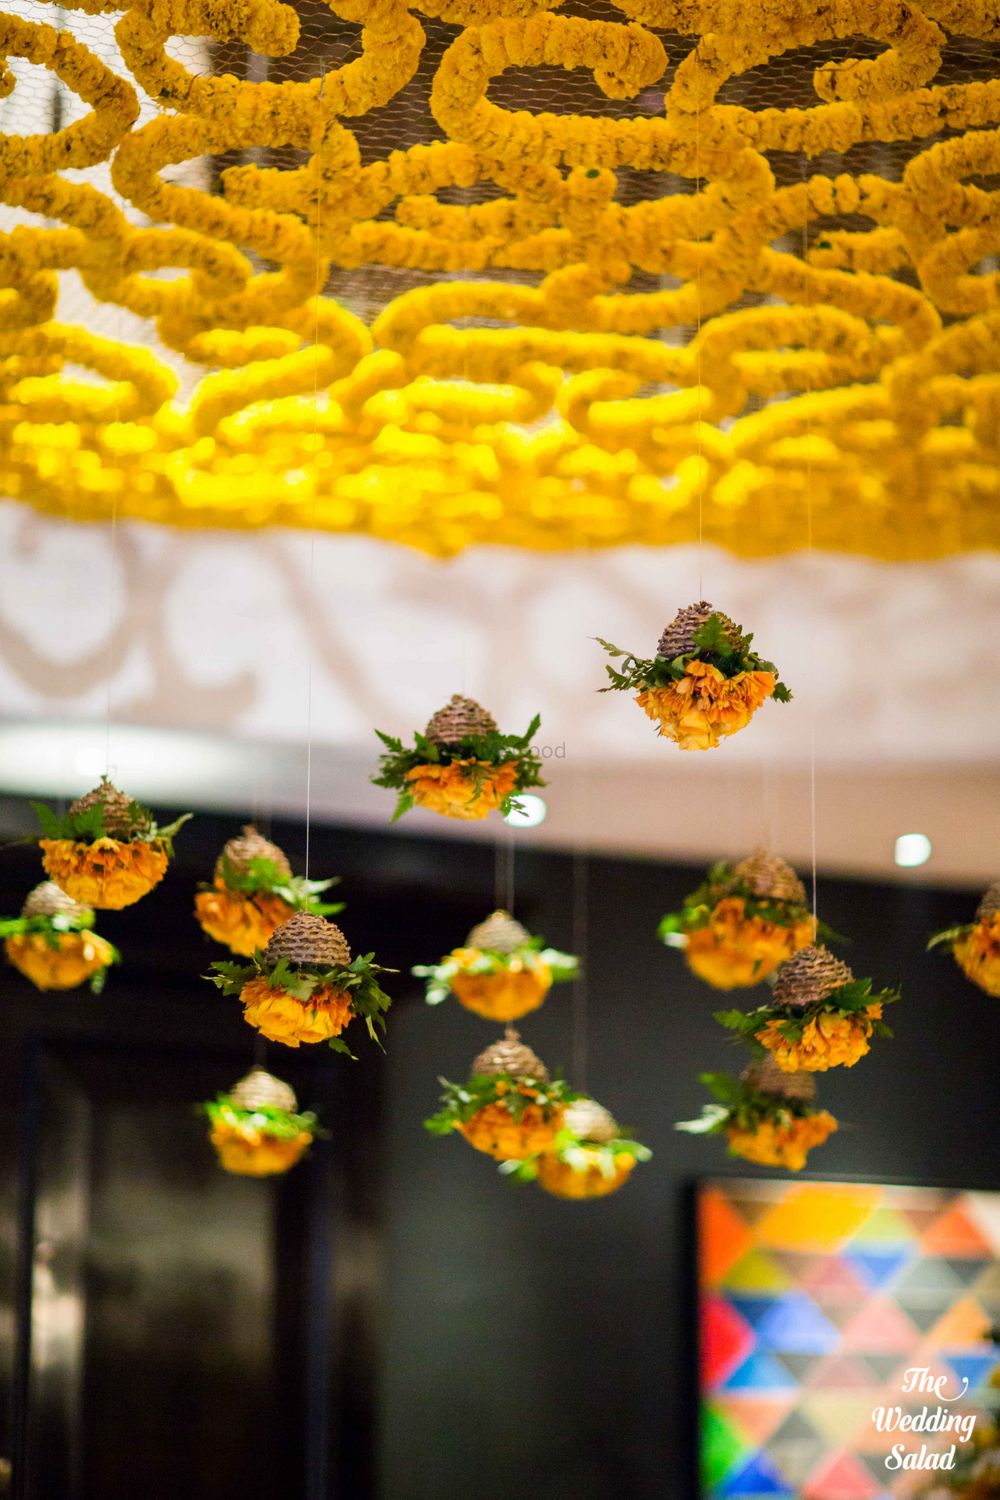 Photo of Floral hanging ceiling arrangements with suspended genda flowers